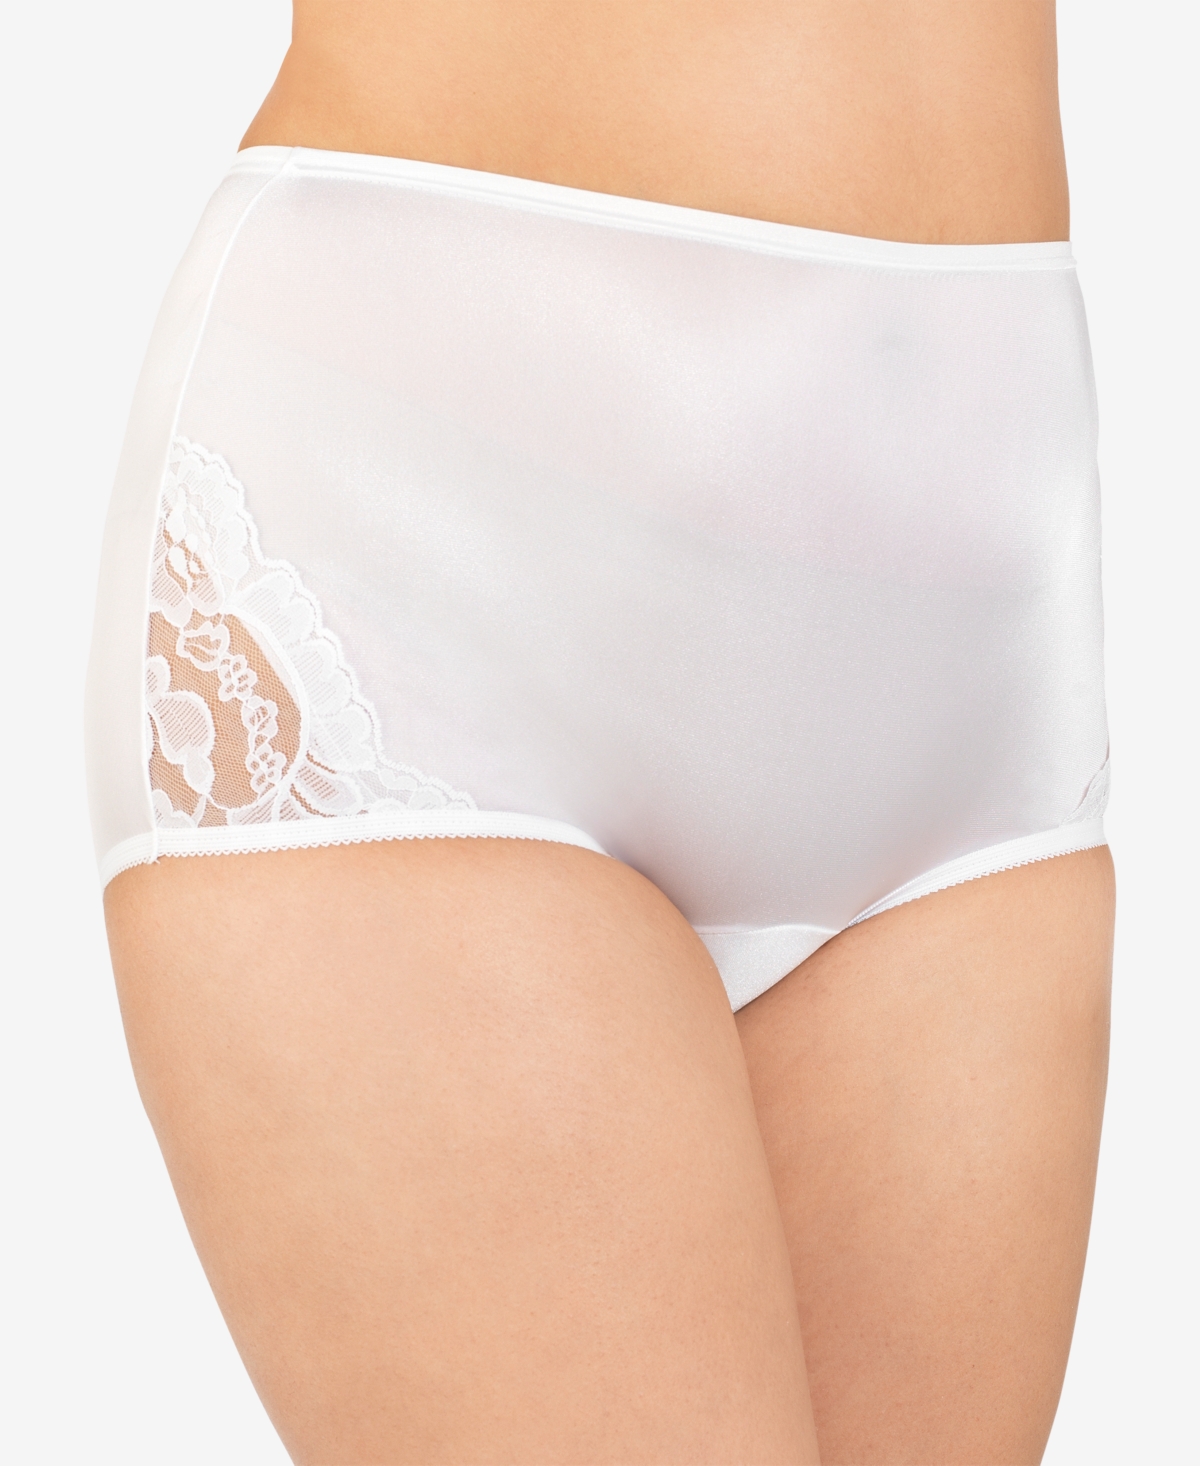 Perfectly Yours Lace Nouveau Nylon Brief Underwear 13001, extended sizes available - Star White